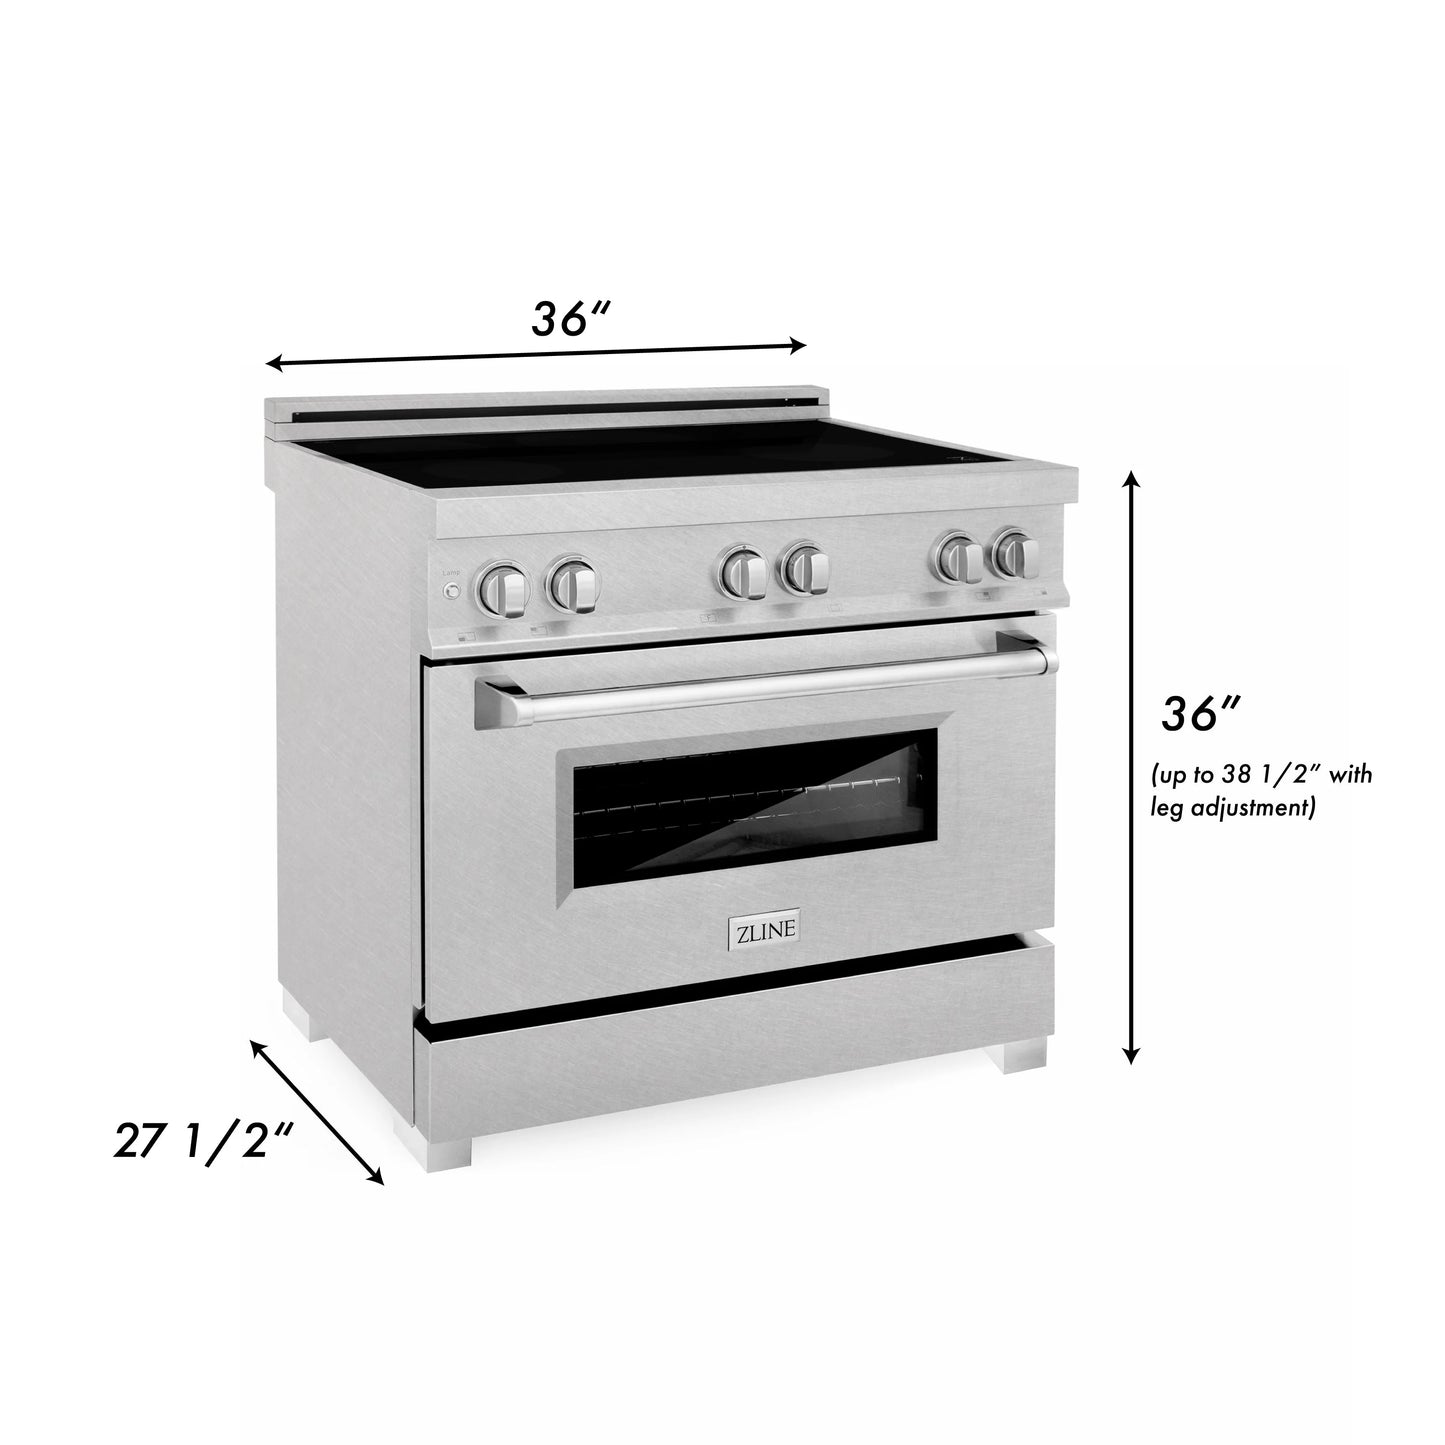 ZLINE 36 in. Induction Range in Fingerprint Resistant DuraSnow Stainless Steel with a 4 Element Stove and Electric Oven (RAINDS-SN-36)